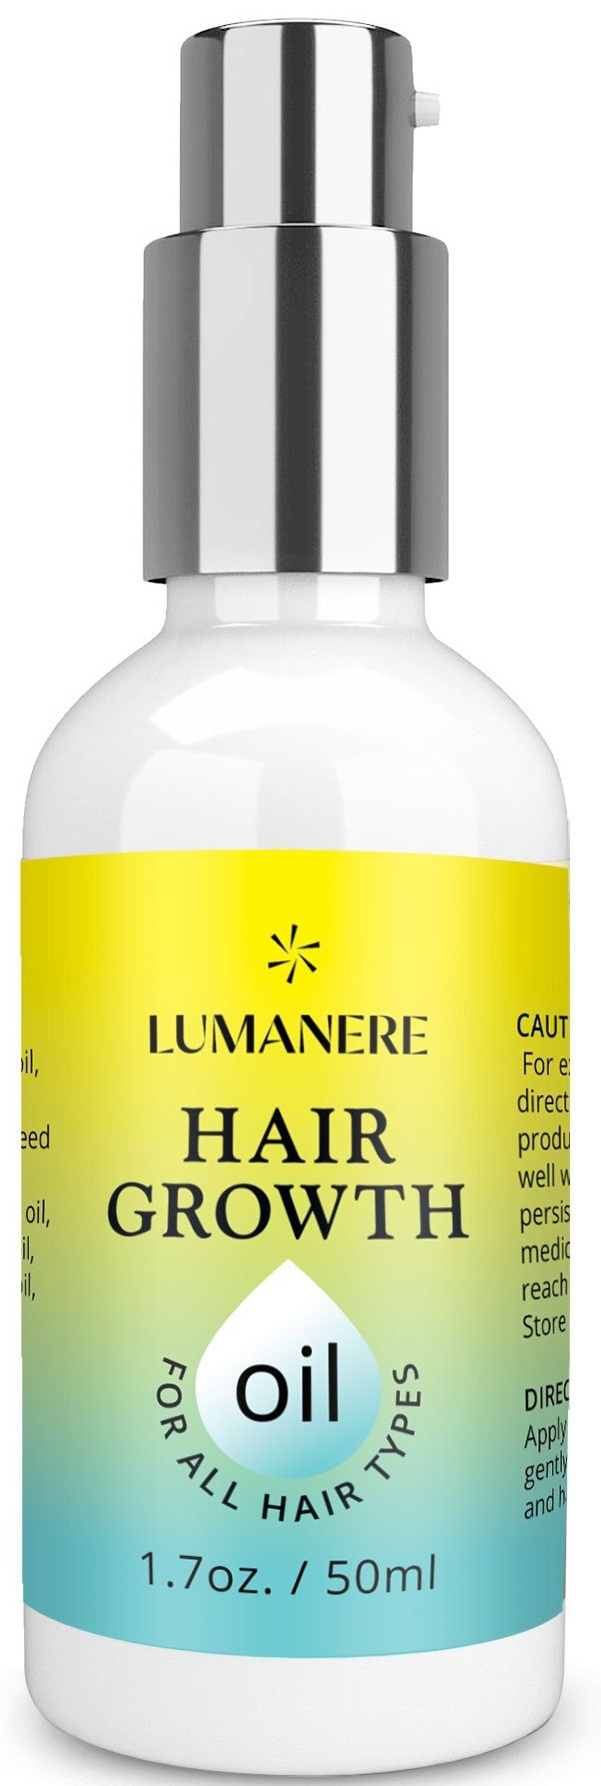 Lumanere Hair Growth Oil ingredients (Explained)